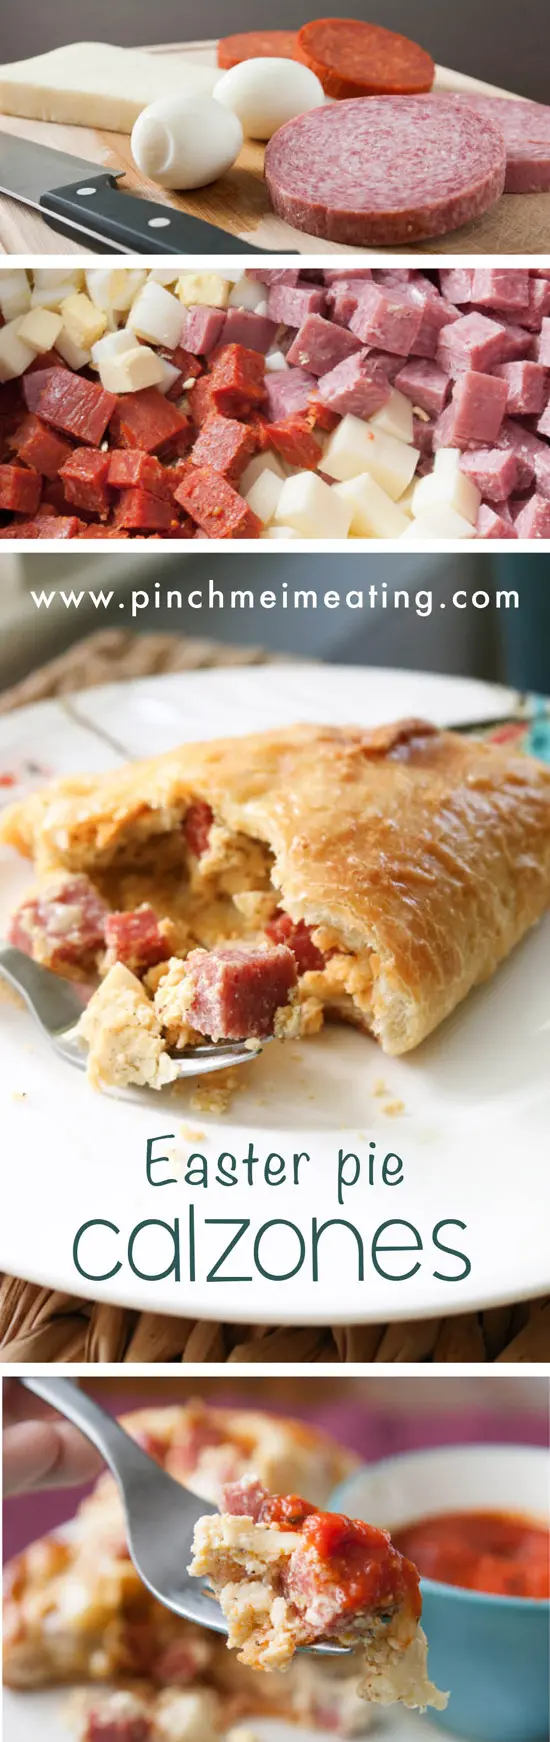 A delicious salami, pepperoni, mozzarella, and ricotta calzone based on Italian Easter pie! | www.pinchmeimeating.com